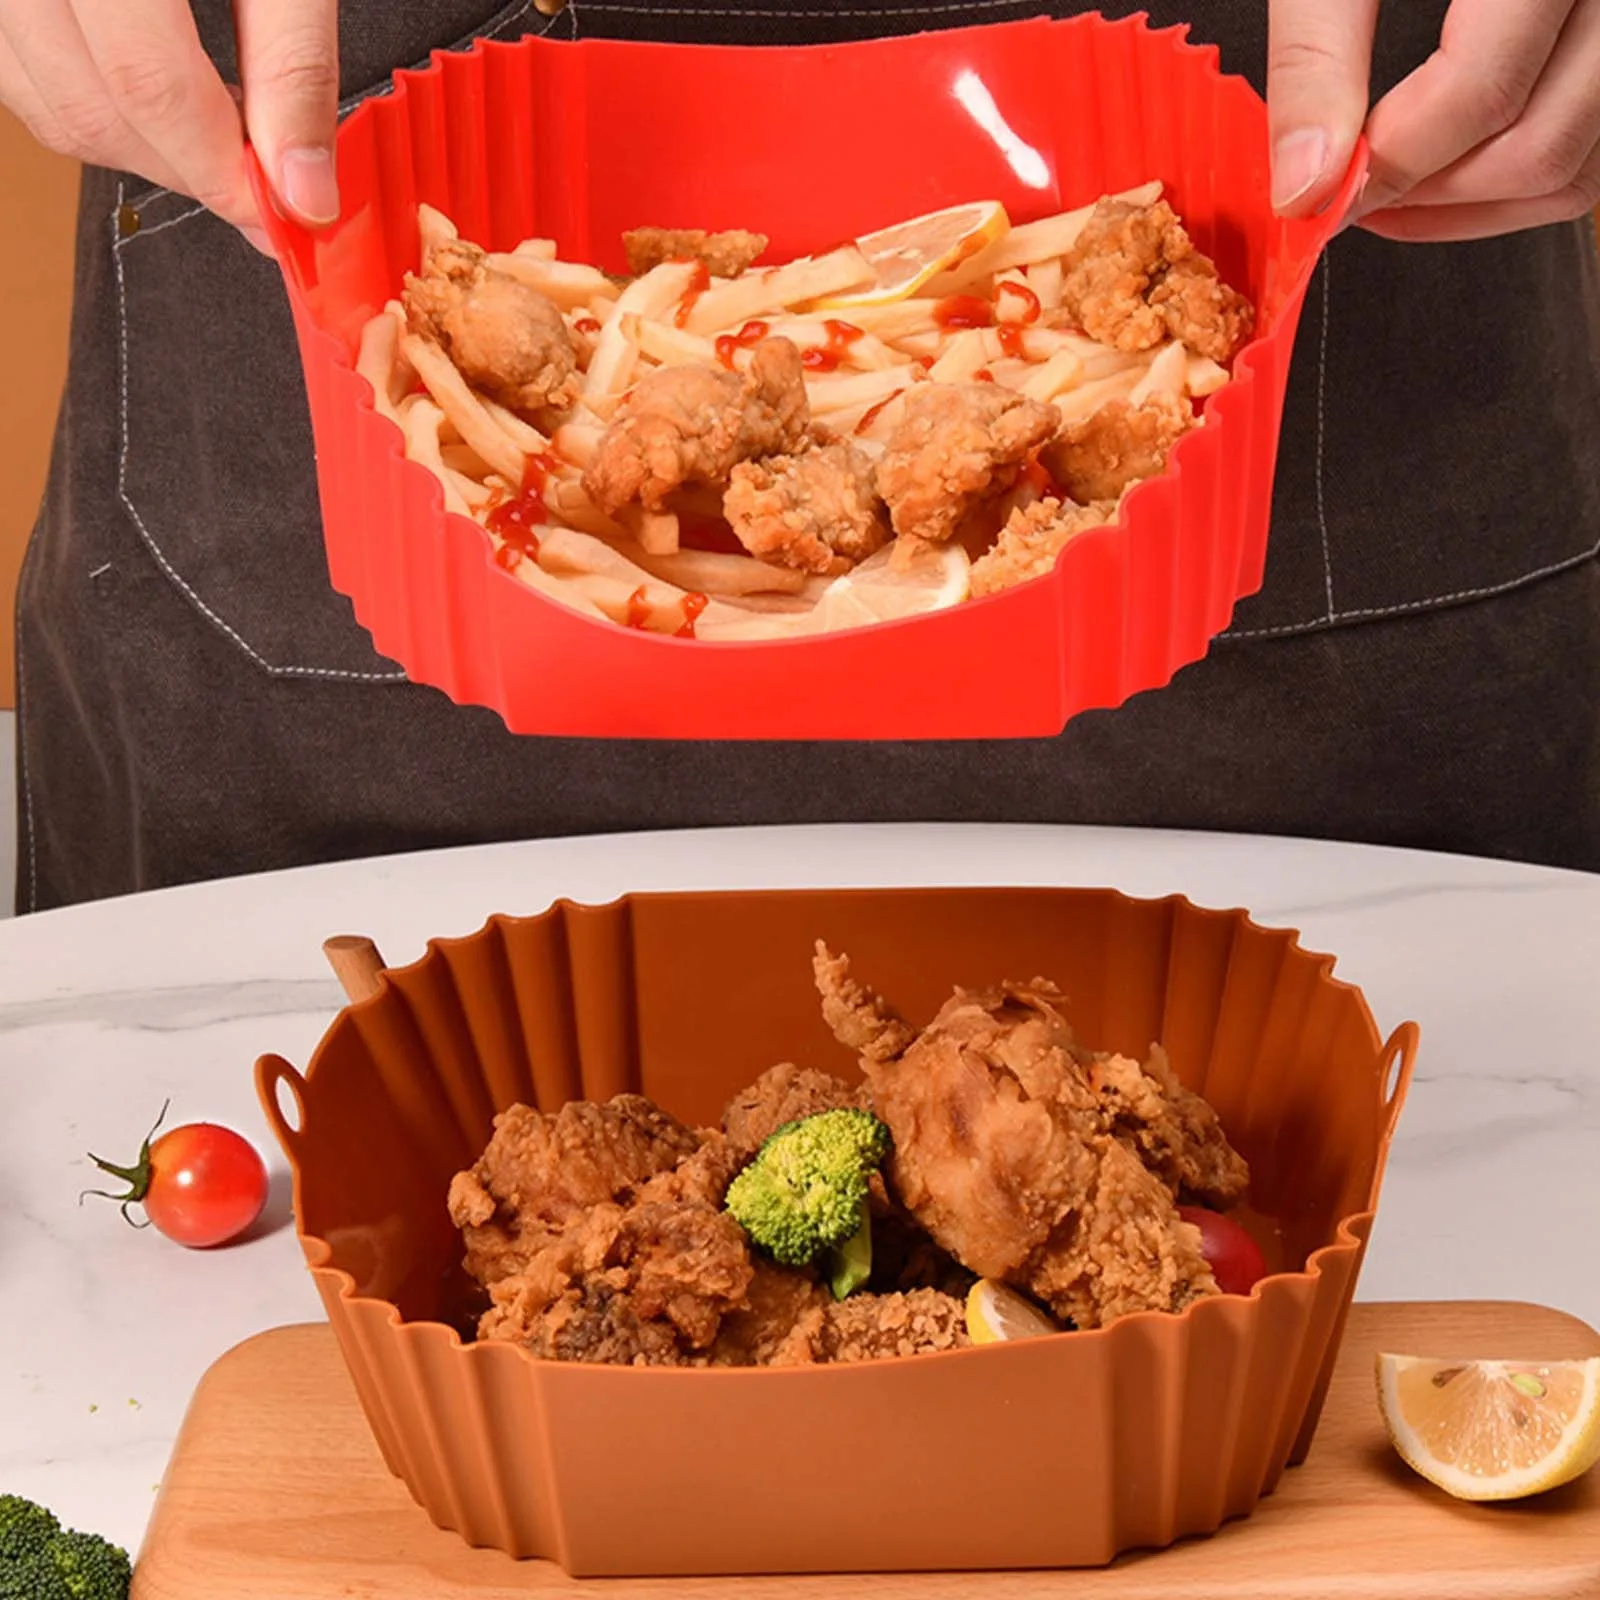 

Airfryer silicone basket Reusable Baking Pan Non-stick Air Fryers Oven Baking Tray Fried Chicken Basket Airfryers Accessories